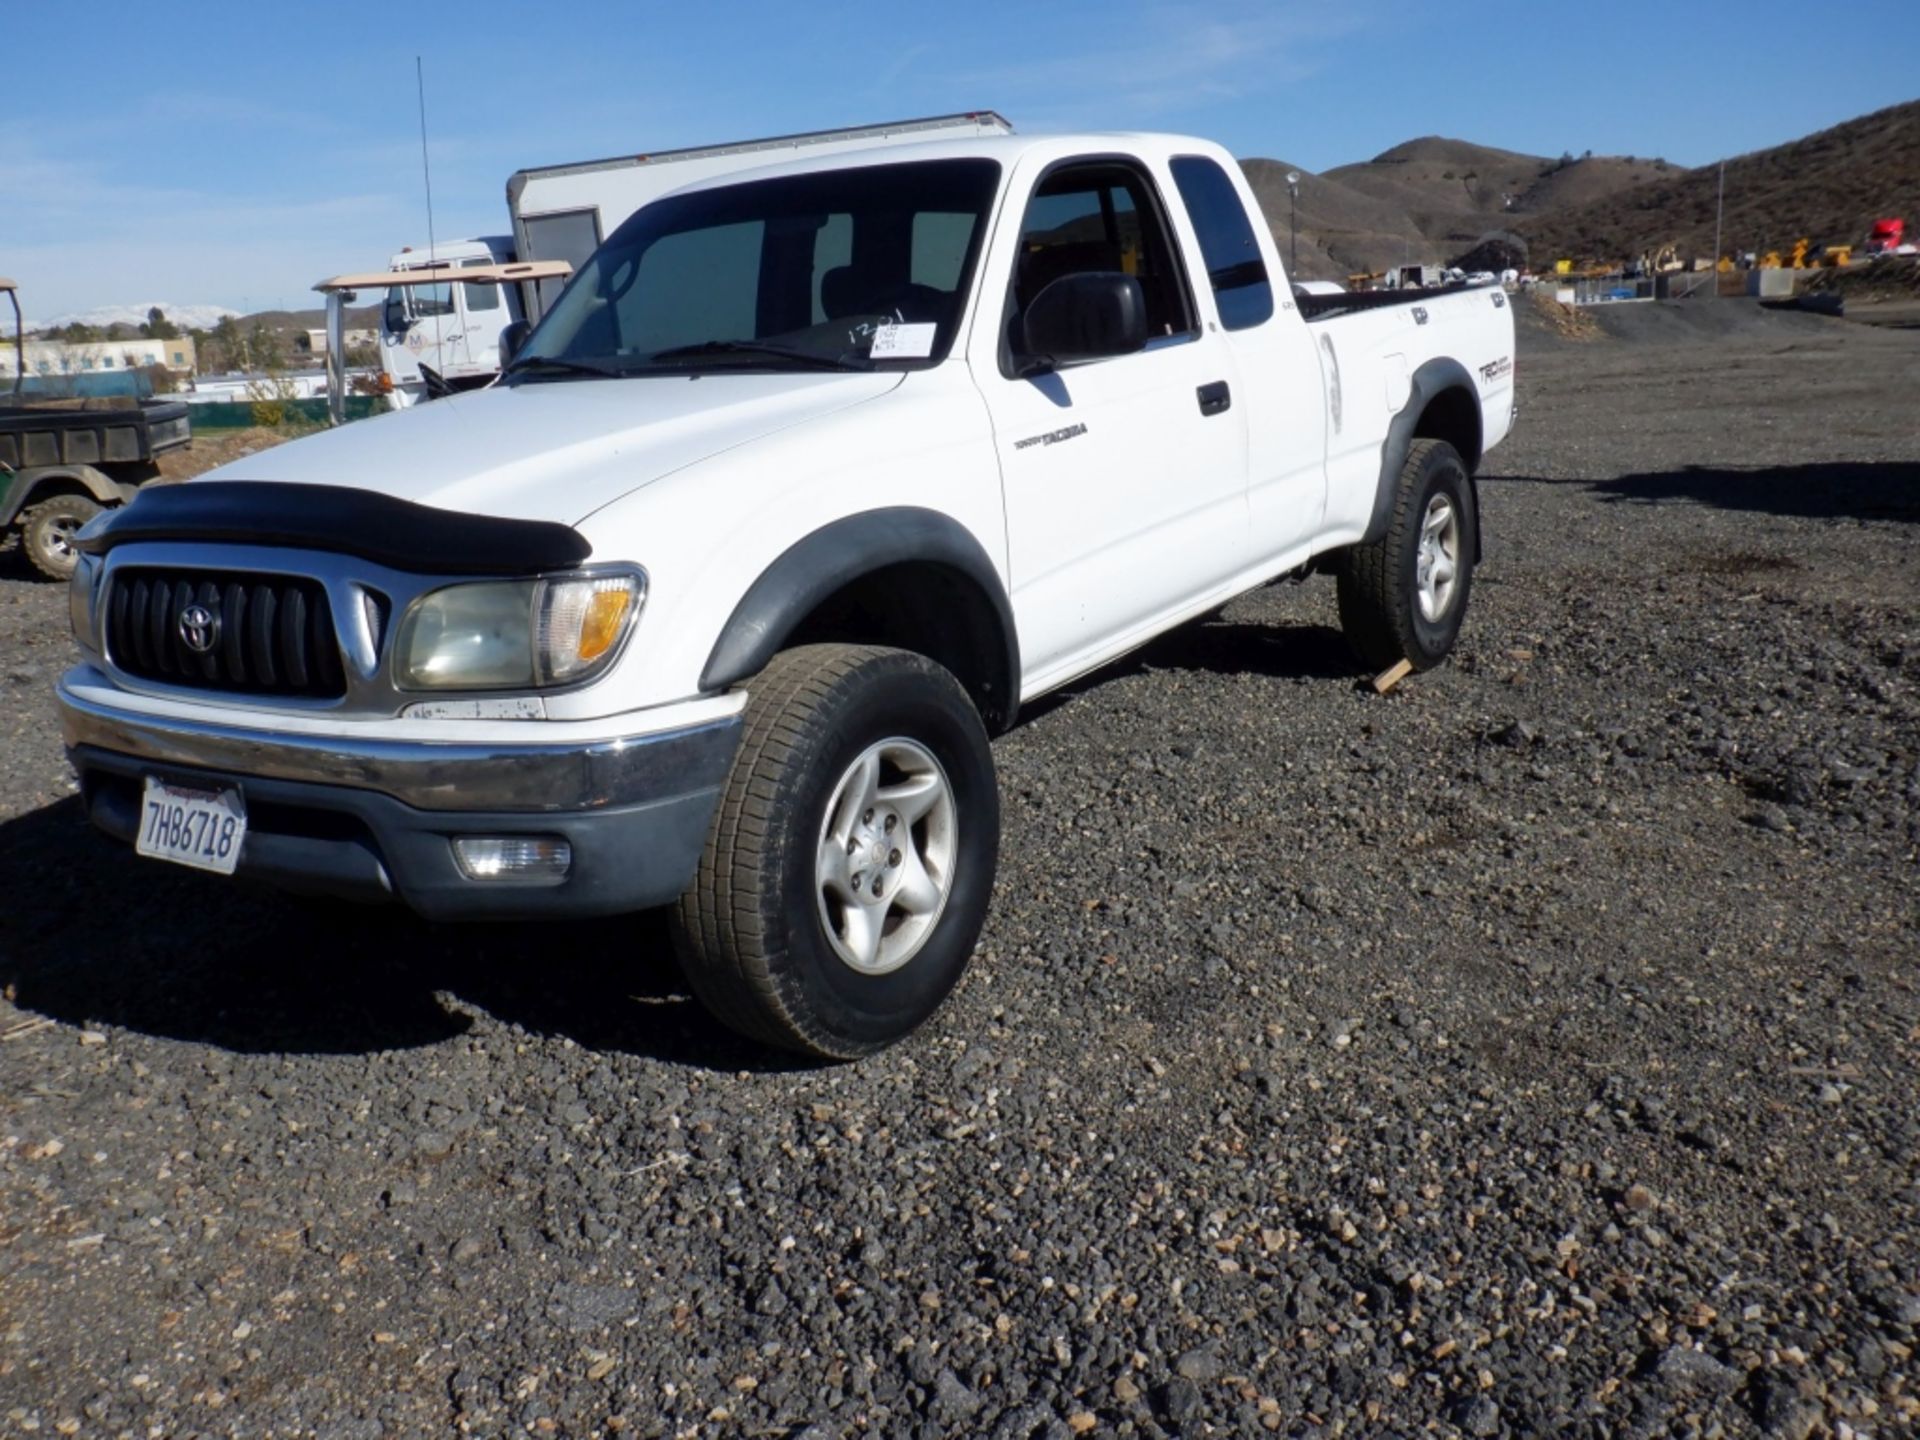 Toyota Tacoma TRD SR5 Extended Cab Pickup, - Image 2 of 52